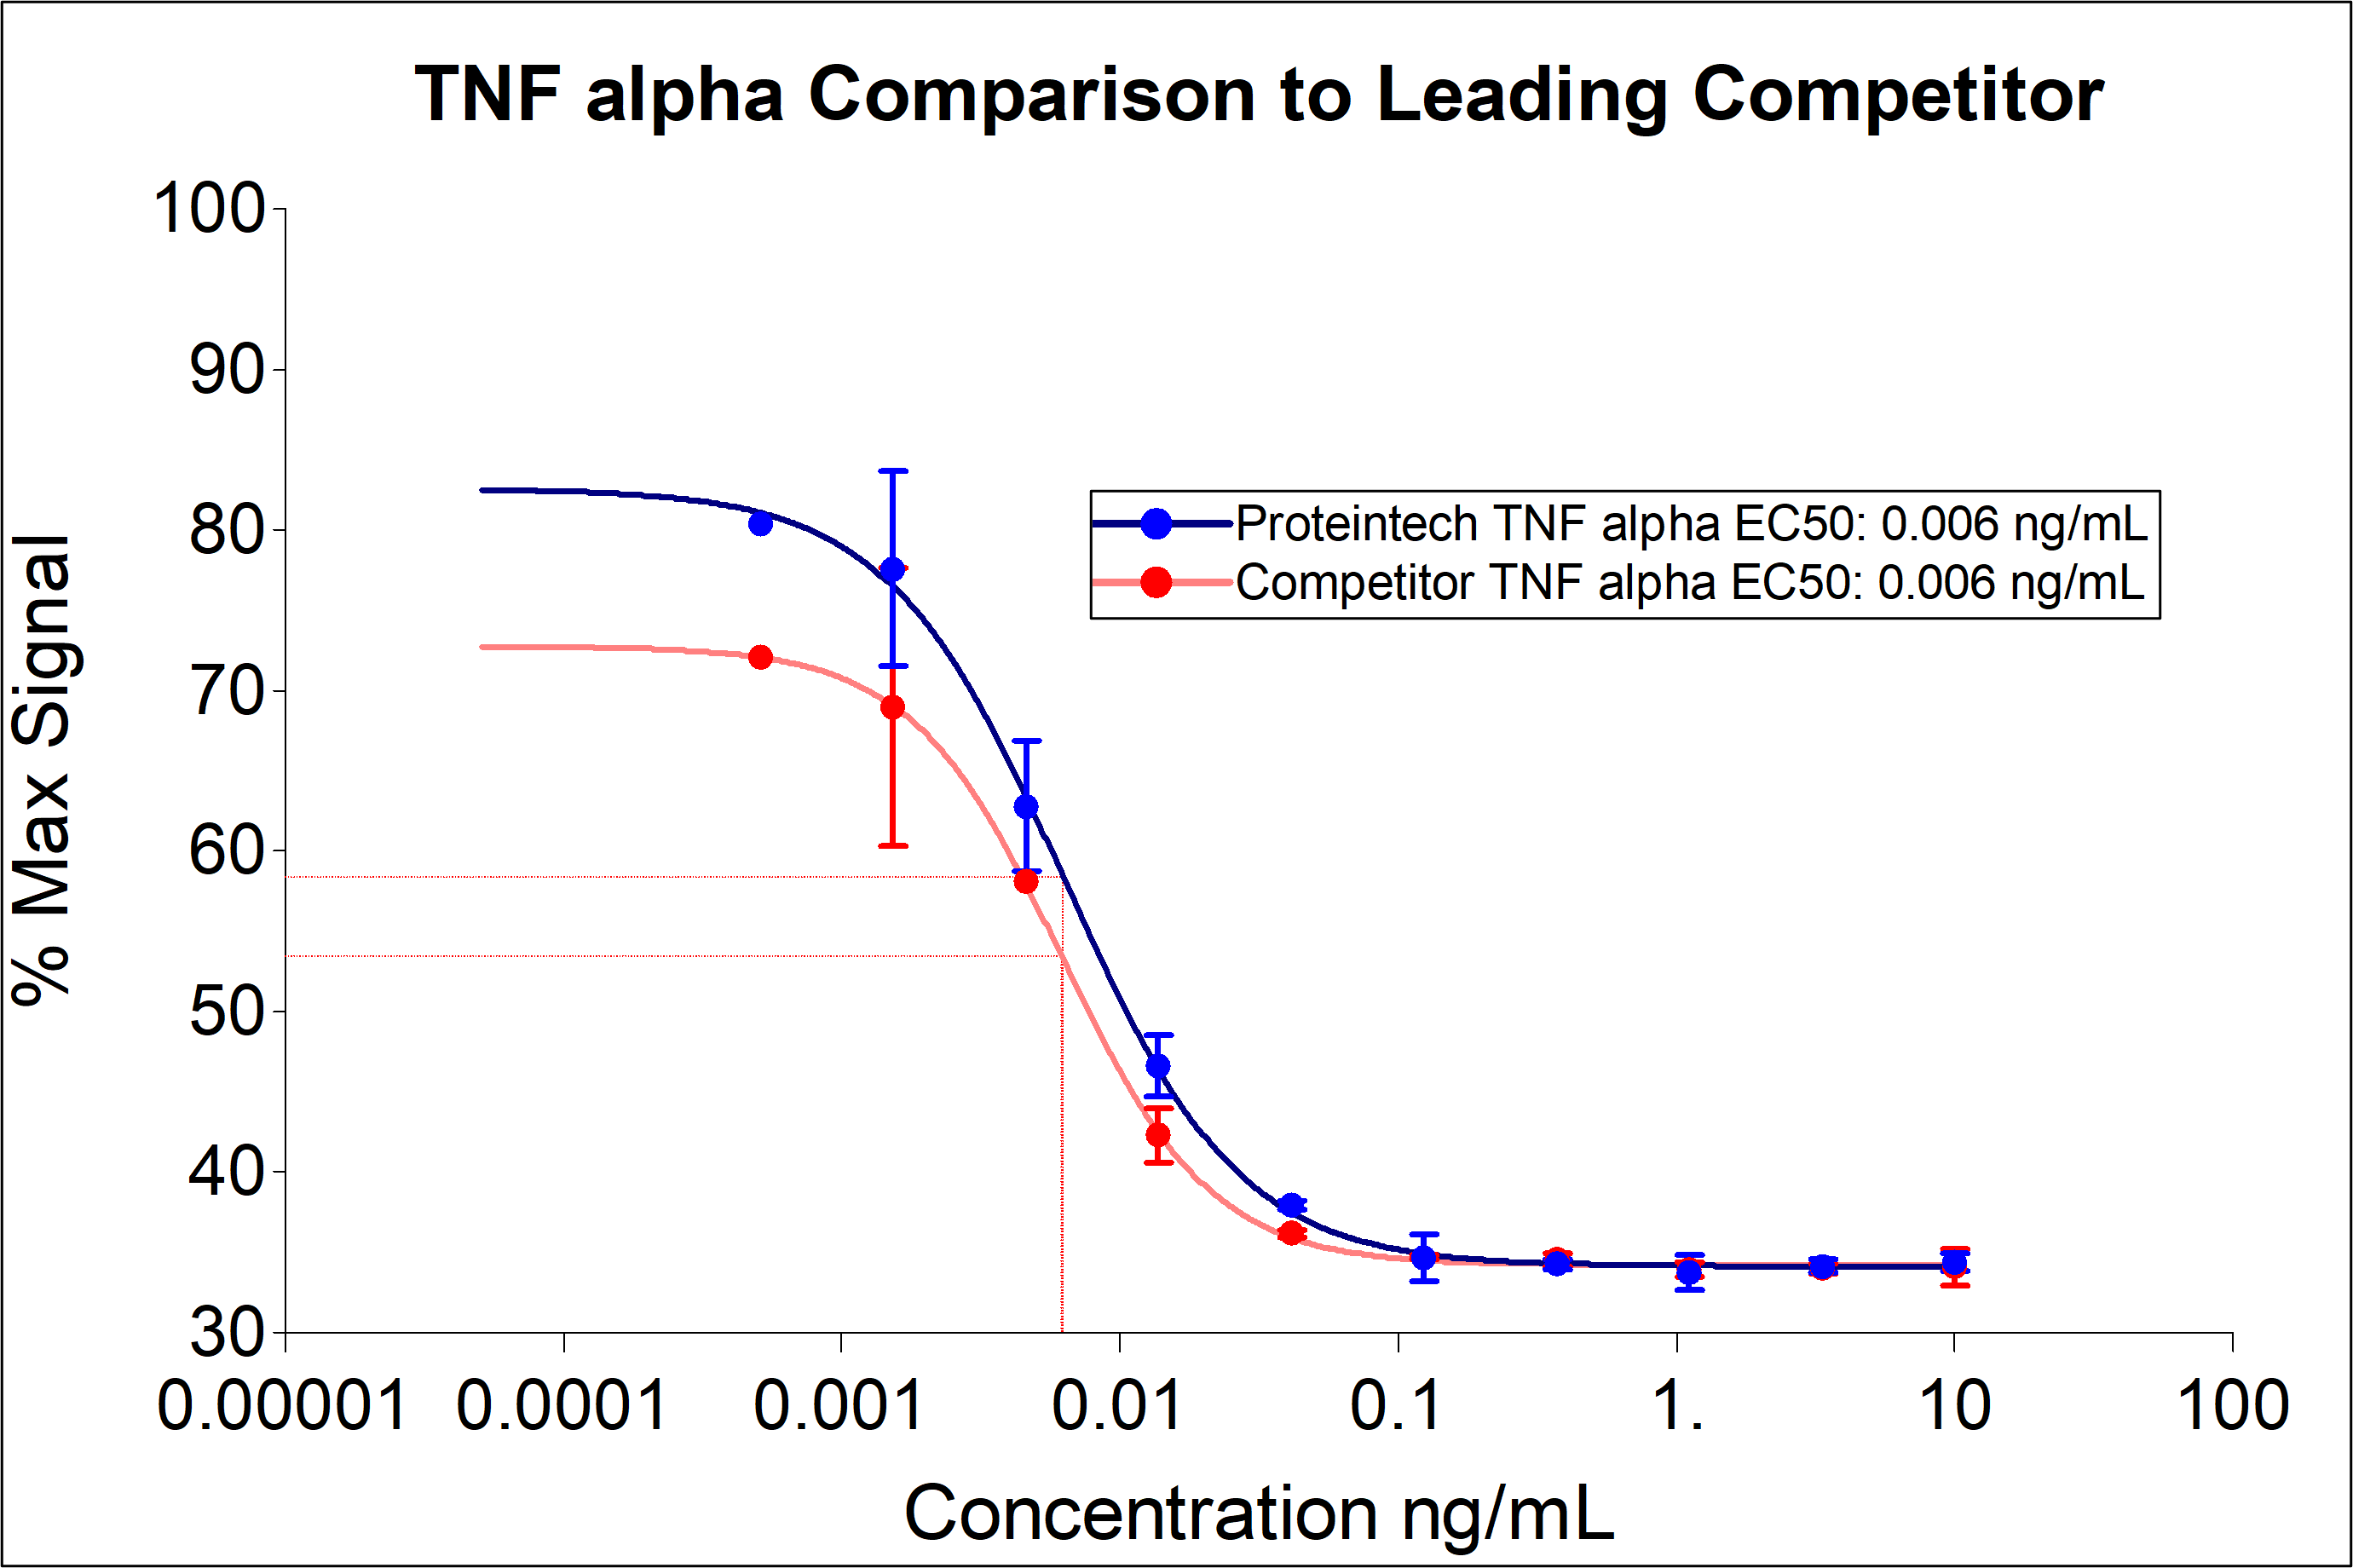 Proteintech TNF alpha demonstrates equivalent induction cytotoxicity and EC50 to leading competitors. TNF alpha (HZ-1014) demonstrates does-dependent cytotoxicity in the L929 mouse adipose cell line. Cell number was quantitatively assessed by PrestoBlue® cell viability reagent. L929 cells were treated with increasing concentrations of GMP recombinant TNF alpha for 72 hours in the presence of actinomycin D. The EC50 was determined using a 4-parameter non-linear regression model. The EC50 range is 0.002-0.026 ng/mL.

